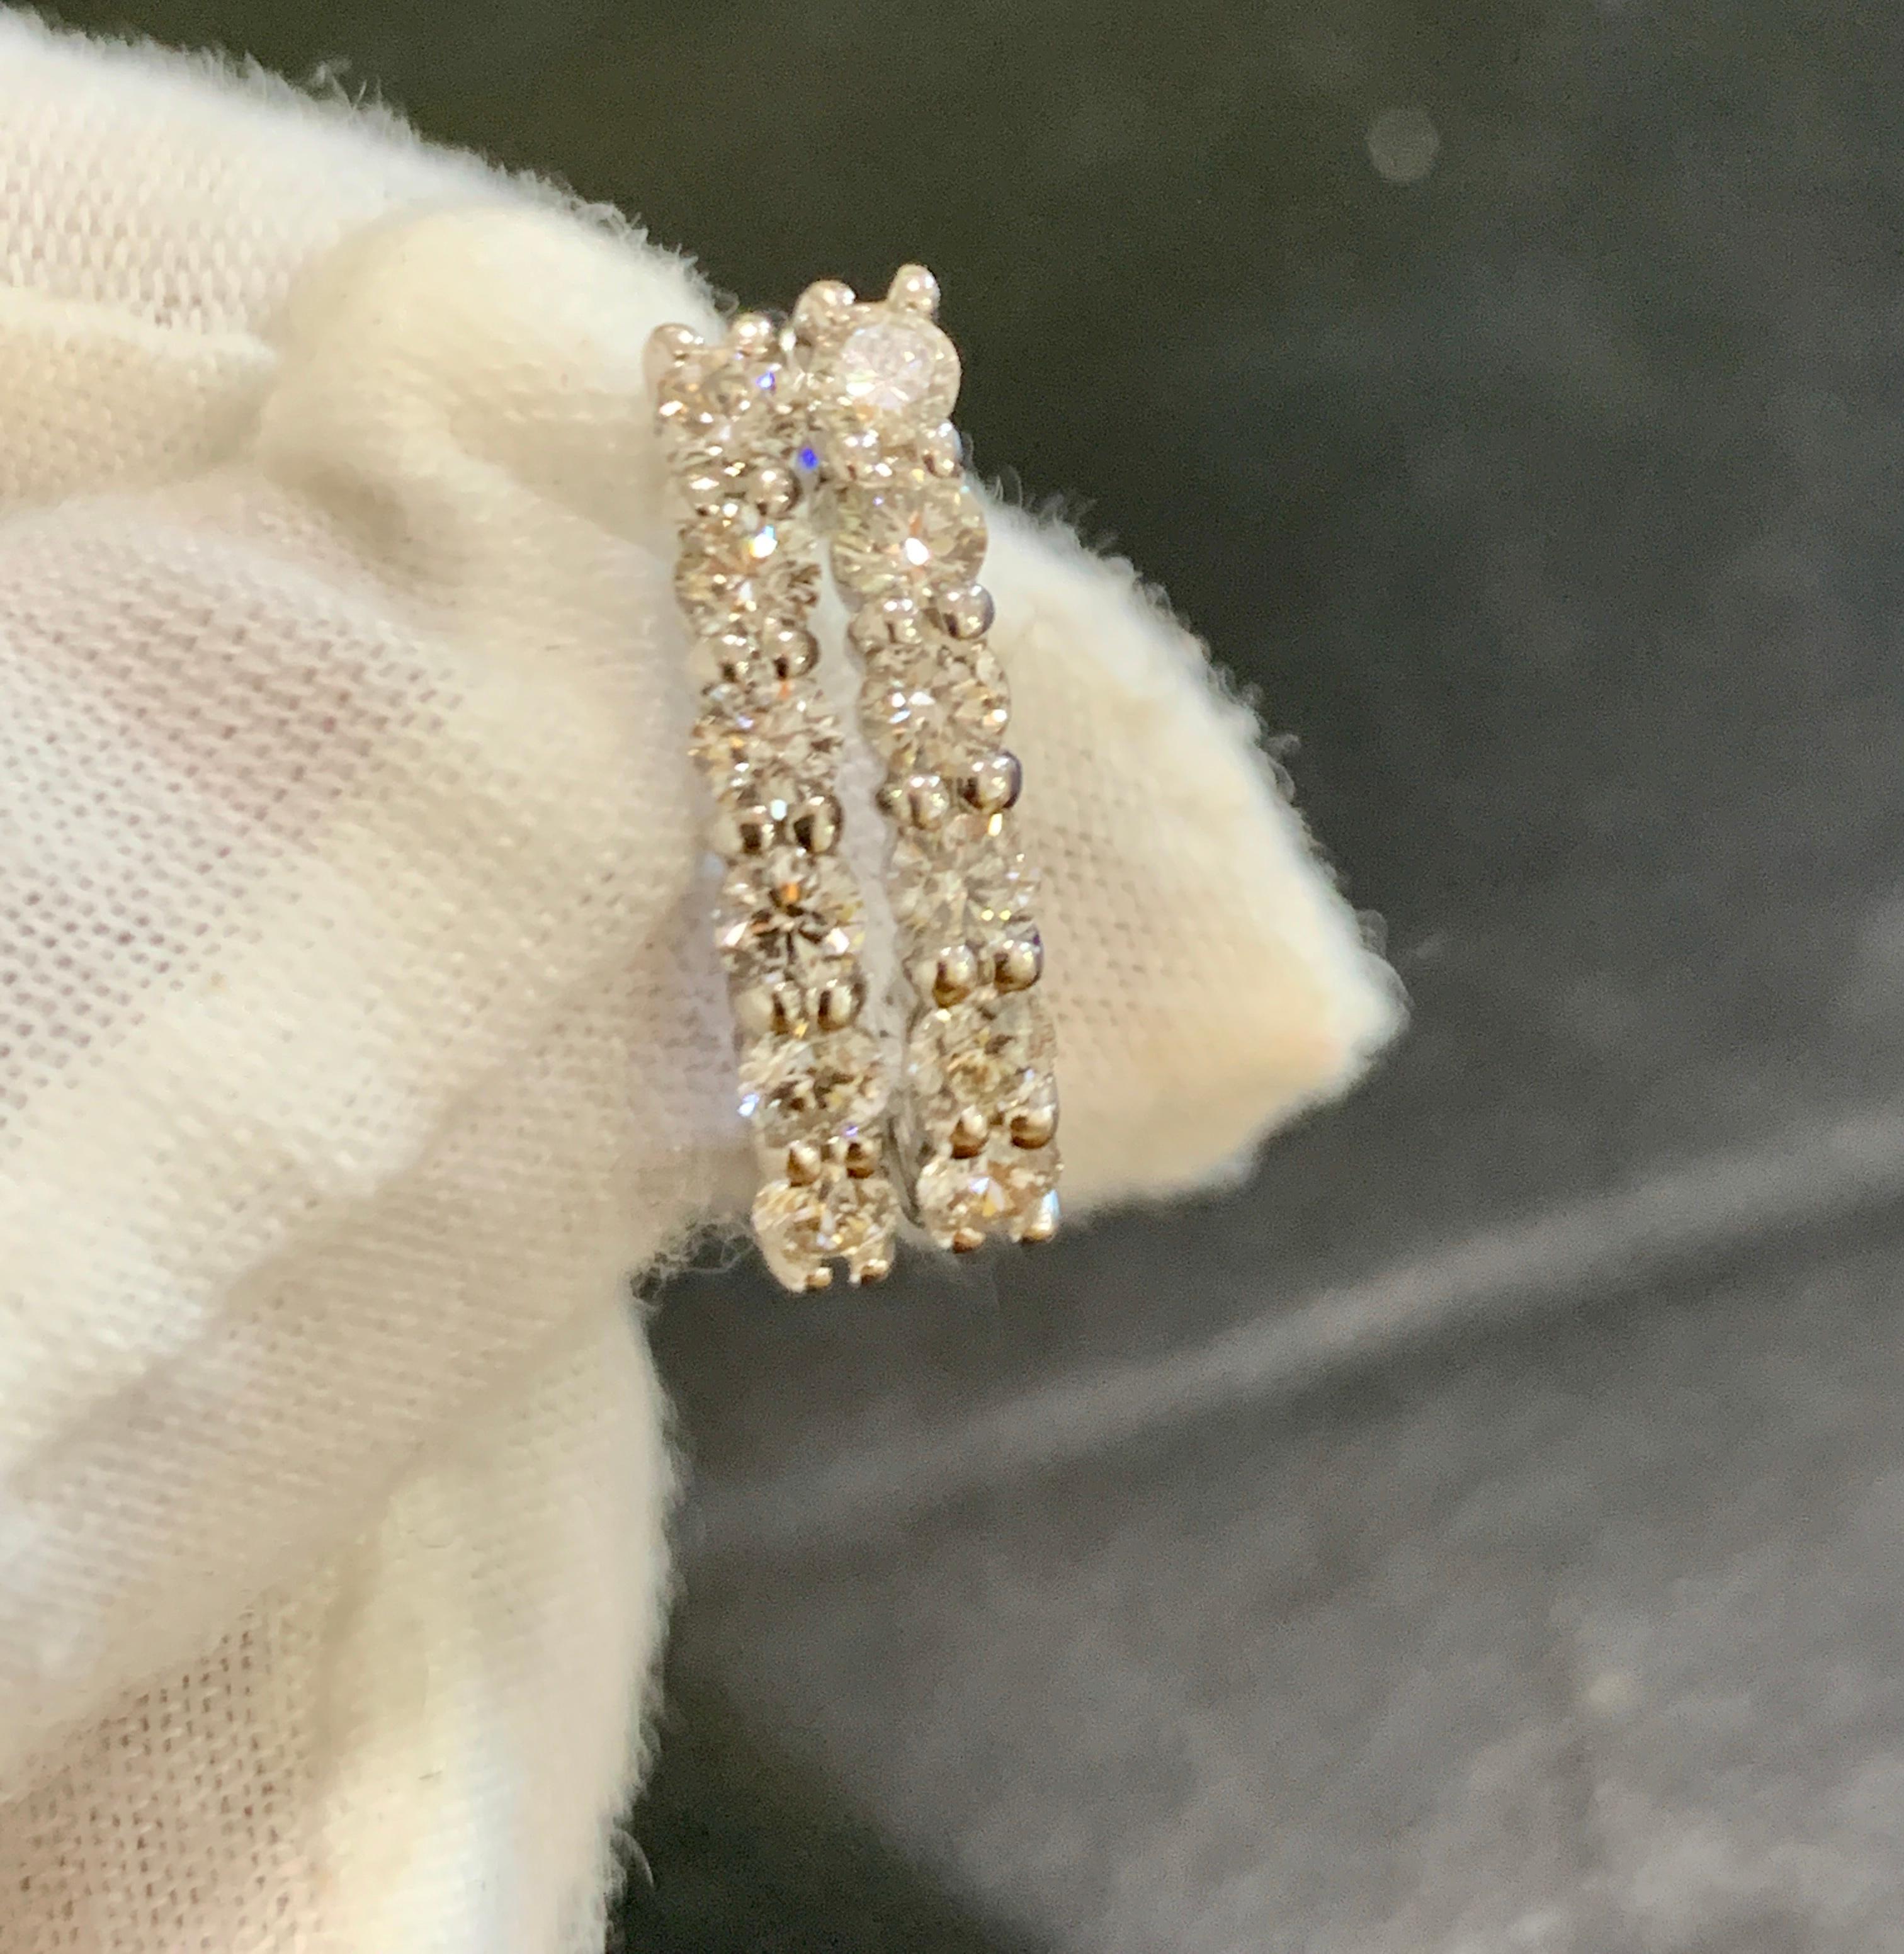 
Designer: Effy
Material: 14k White  gold 
Diamonds: 12 round brilliant cut =Approximately 1.0 Ct total weight 
Front facing huggies
Color: G
Clarity: VS
Weight: 4 Grams
It's a Estate piece so all measurements are approximate.
Please read my reviews